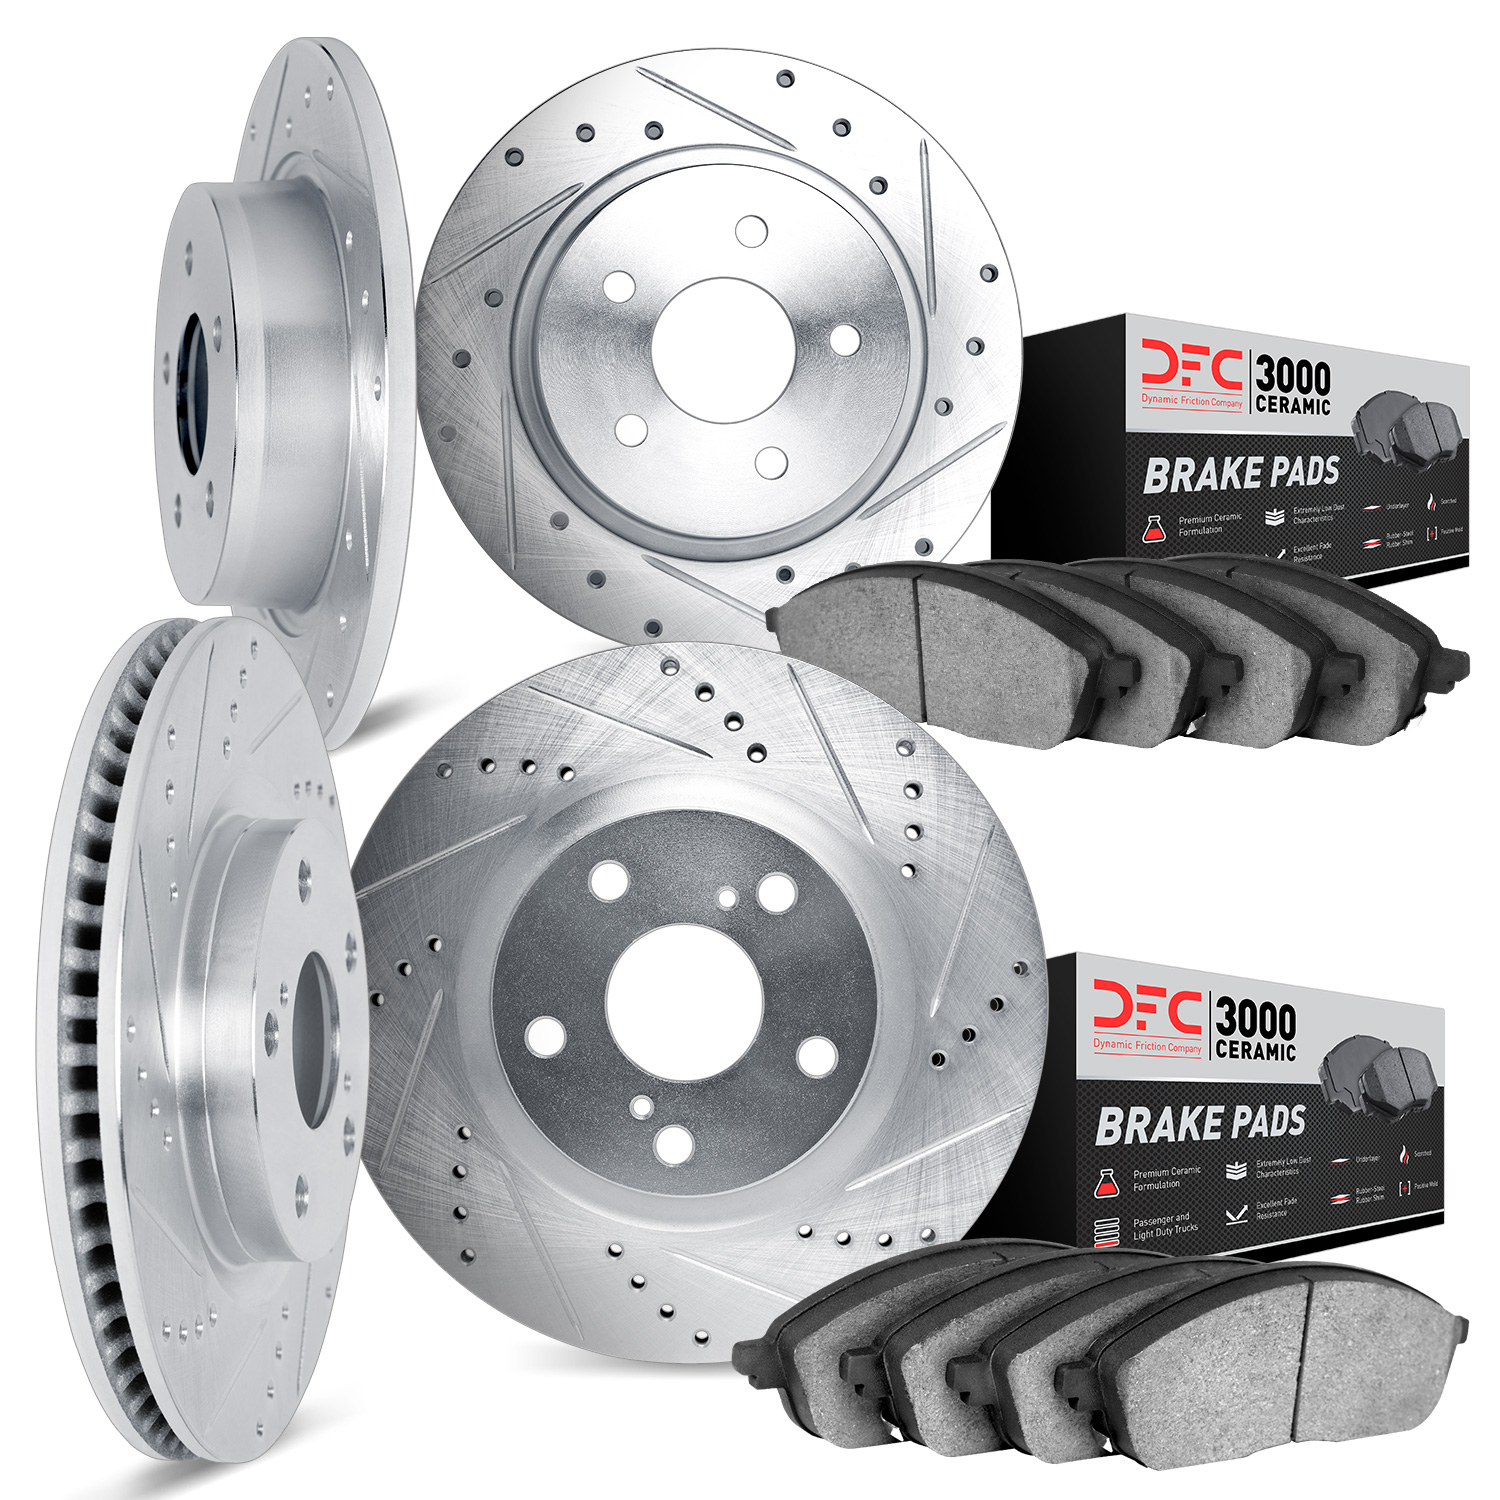 7304-54083 Drilled/Slotted Brake Rotor with 3000-Series Ceramic Brake Pads Kit [Silver], 2006-2013 Ford/Lincoln/Mercury/Mazda, P